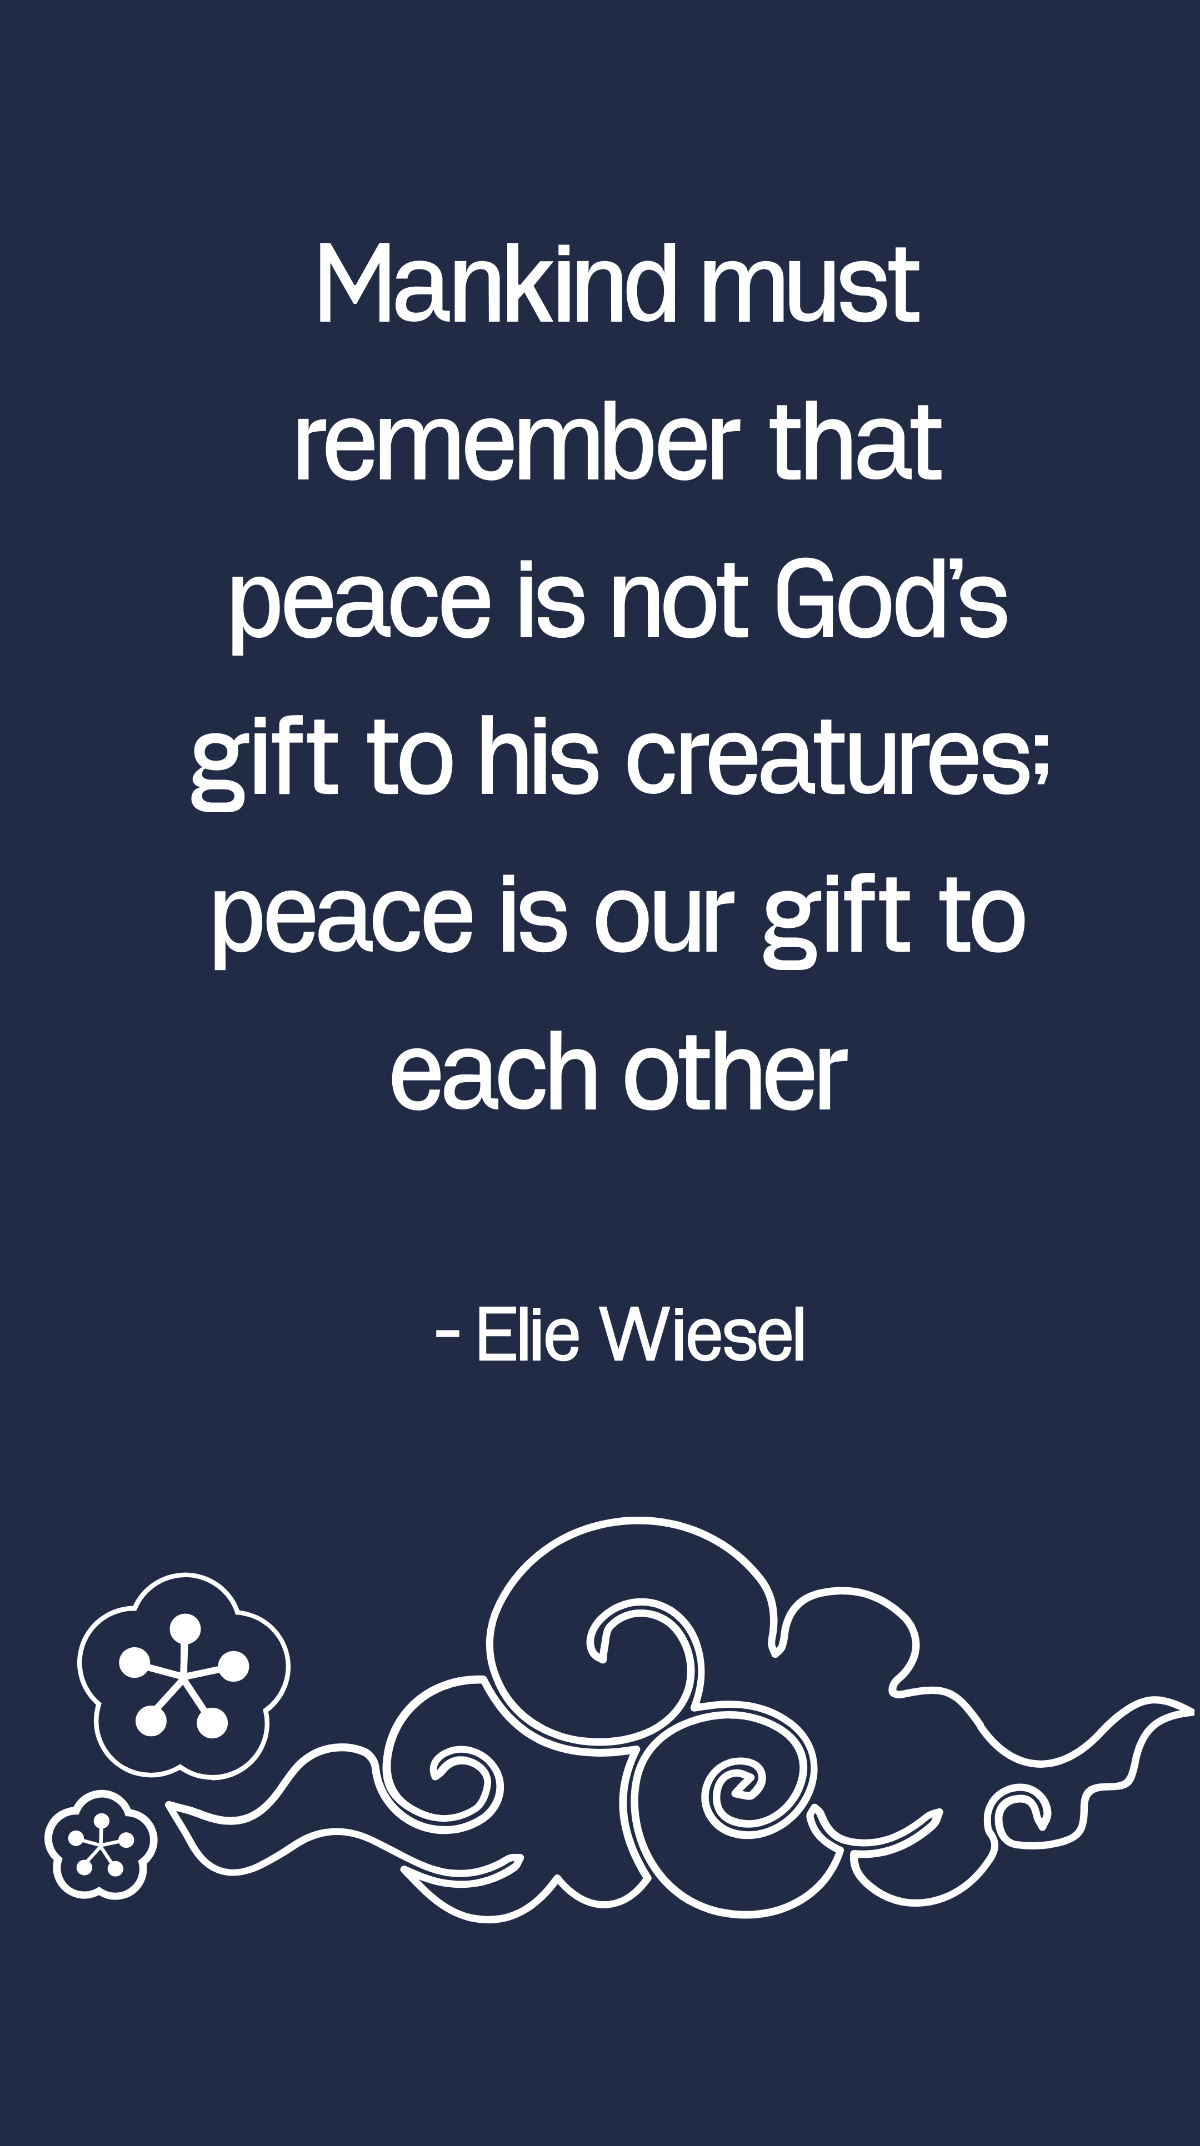 Elie Wiesel - Mankind must remember that peace is not God's gift to his creatures; peace is our gift to each other Template